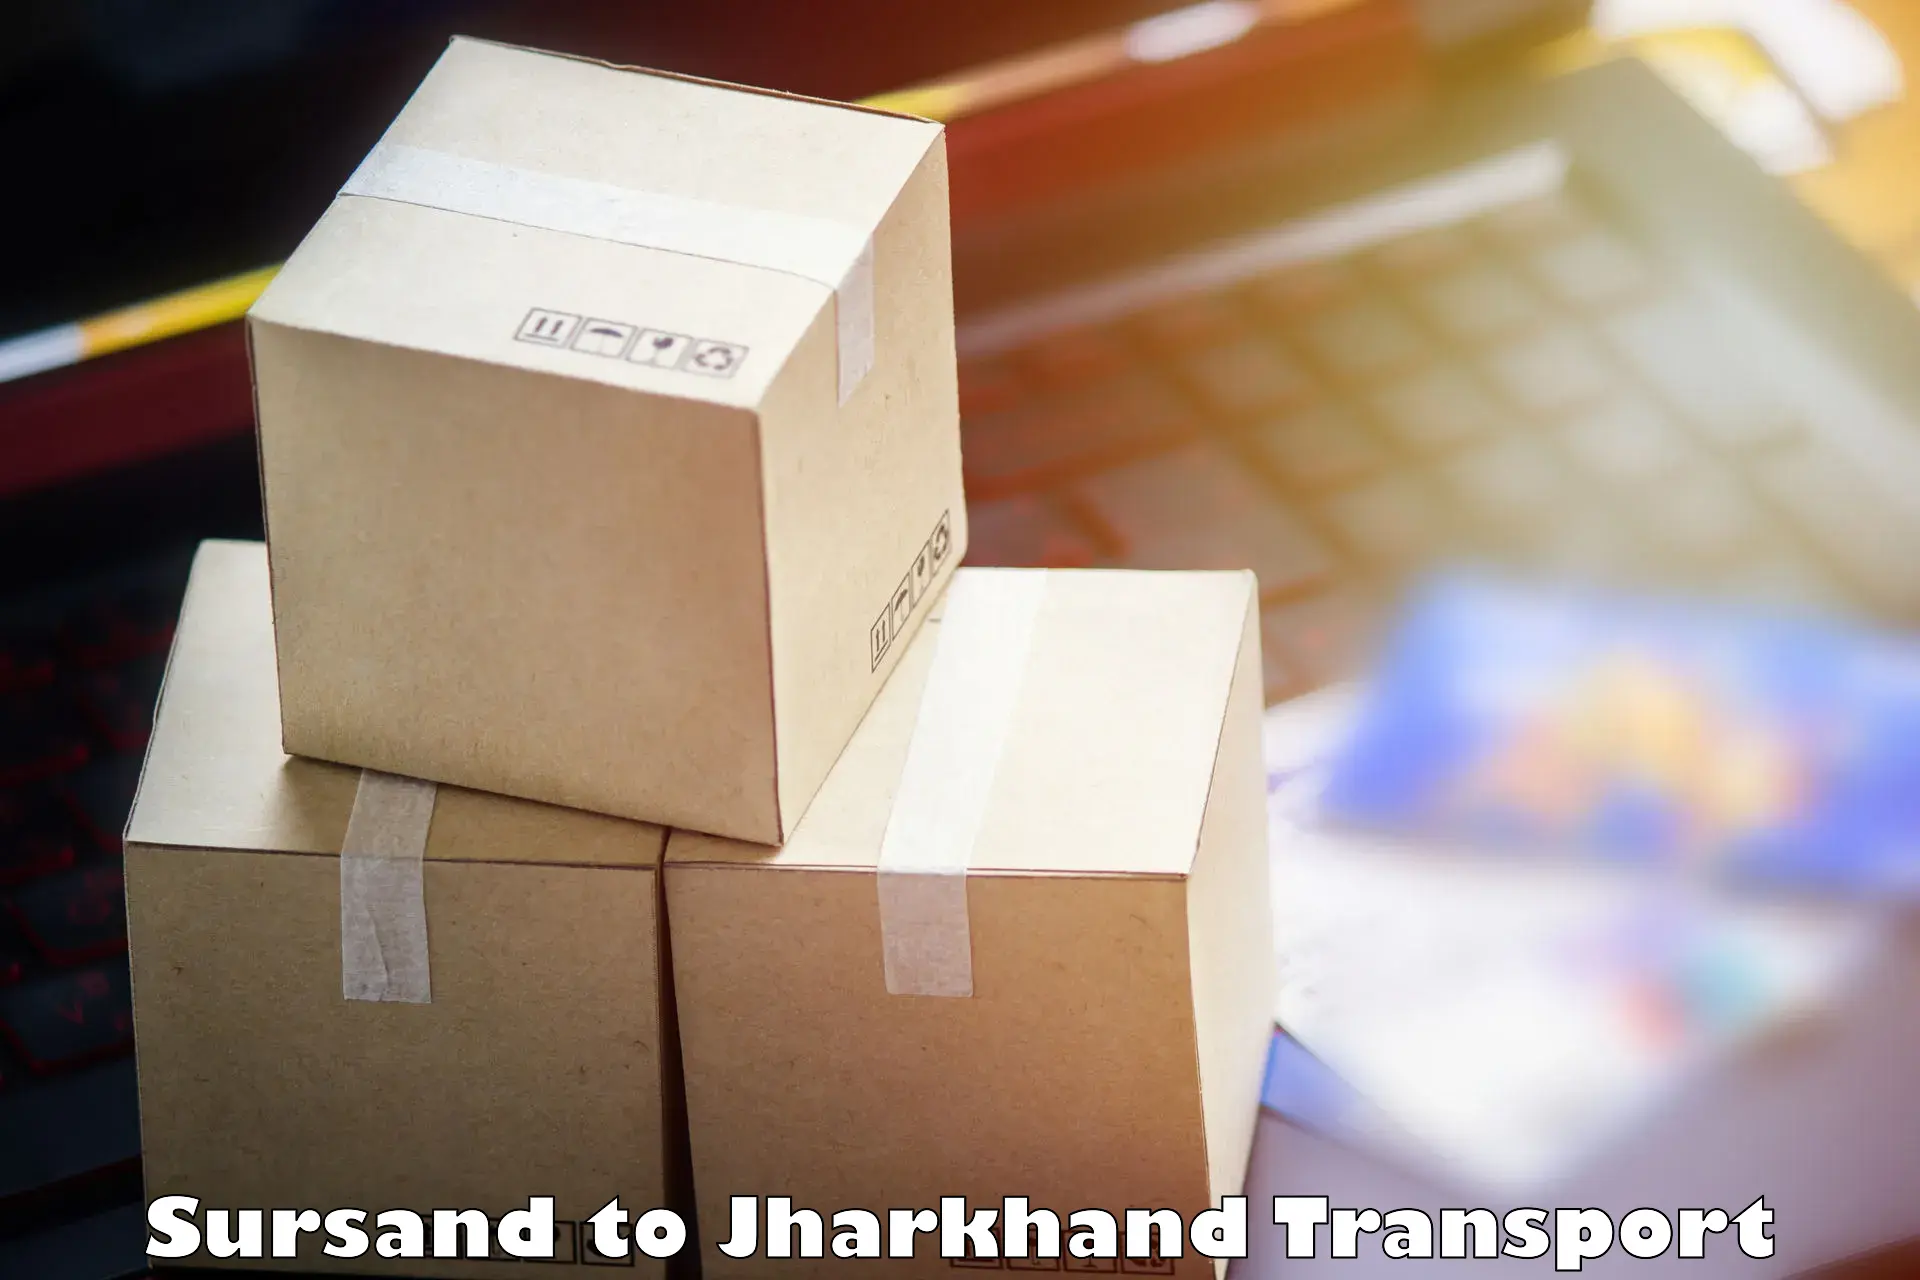 Truck transport companies in India Sursand to Jharkhand